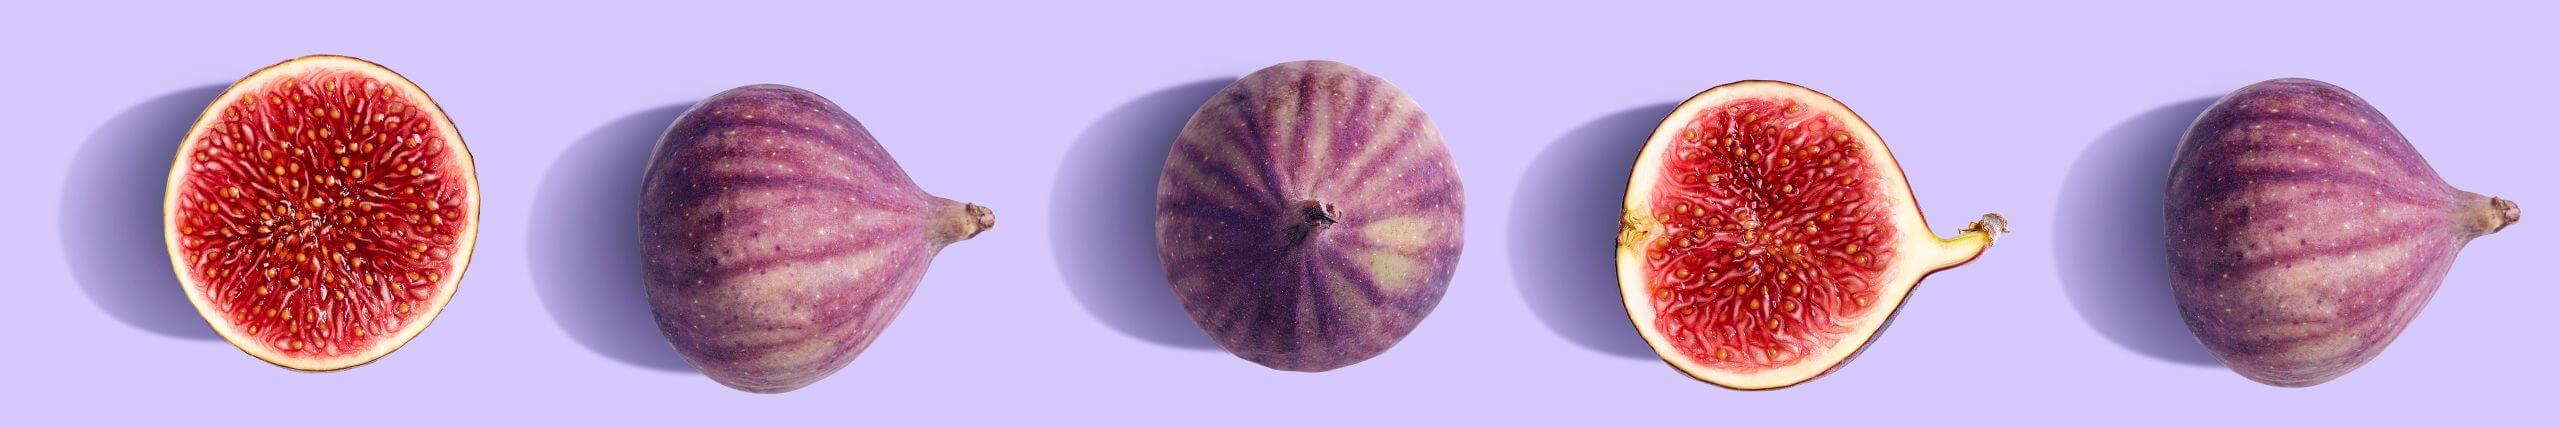 Row of figs against a purple background